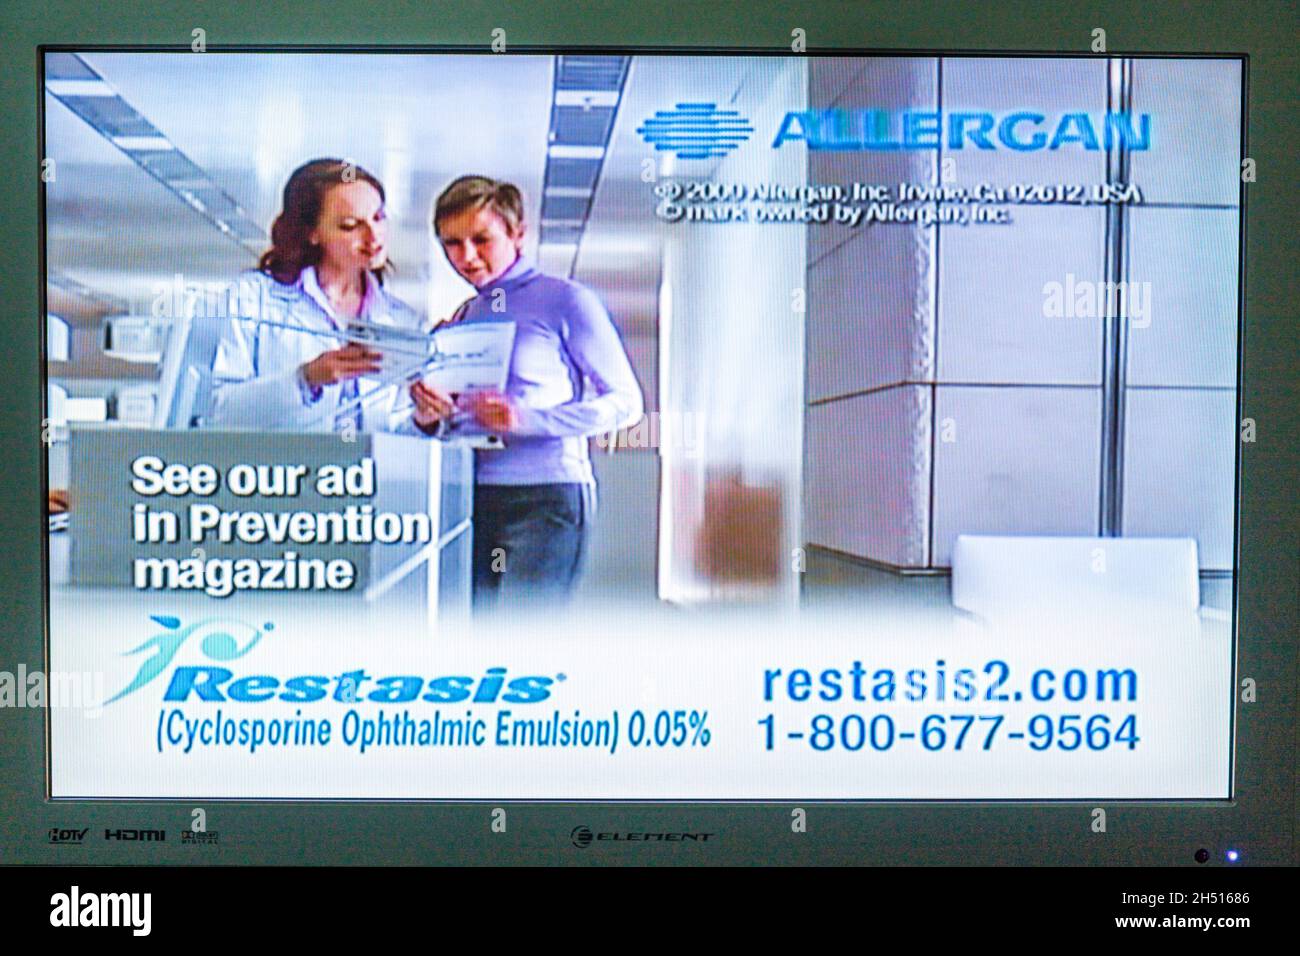 TV television screen ad advertisement commercial,Restasis prescription eye drops ophthalmic solution Allergan,medication eyecare health vision eyes Stock Photo